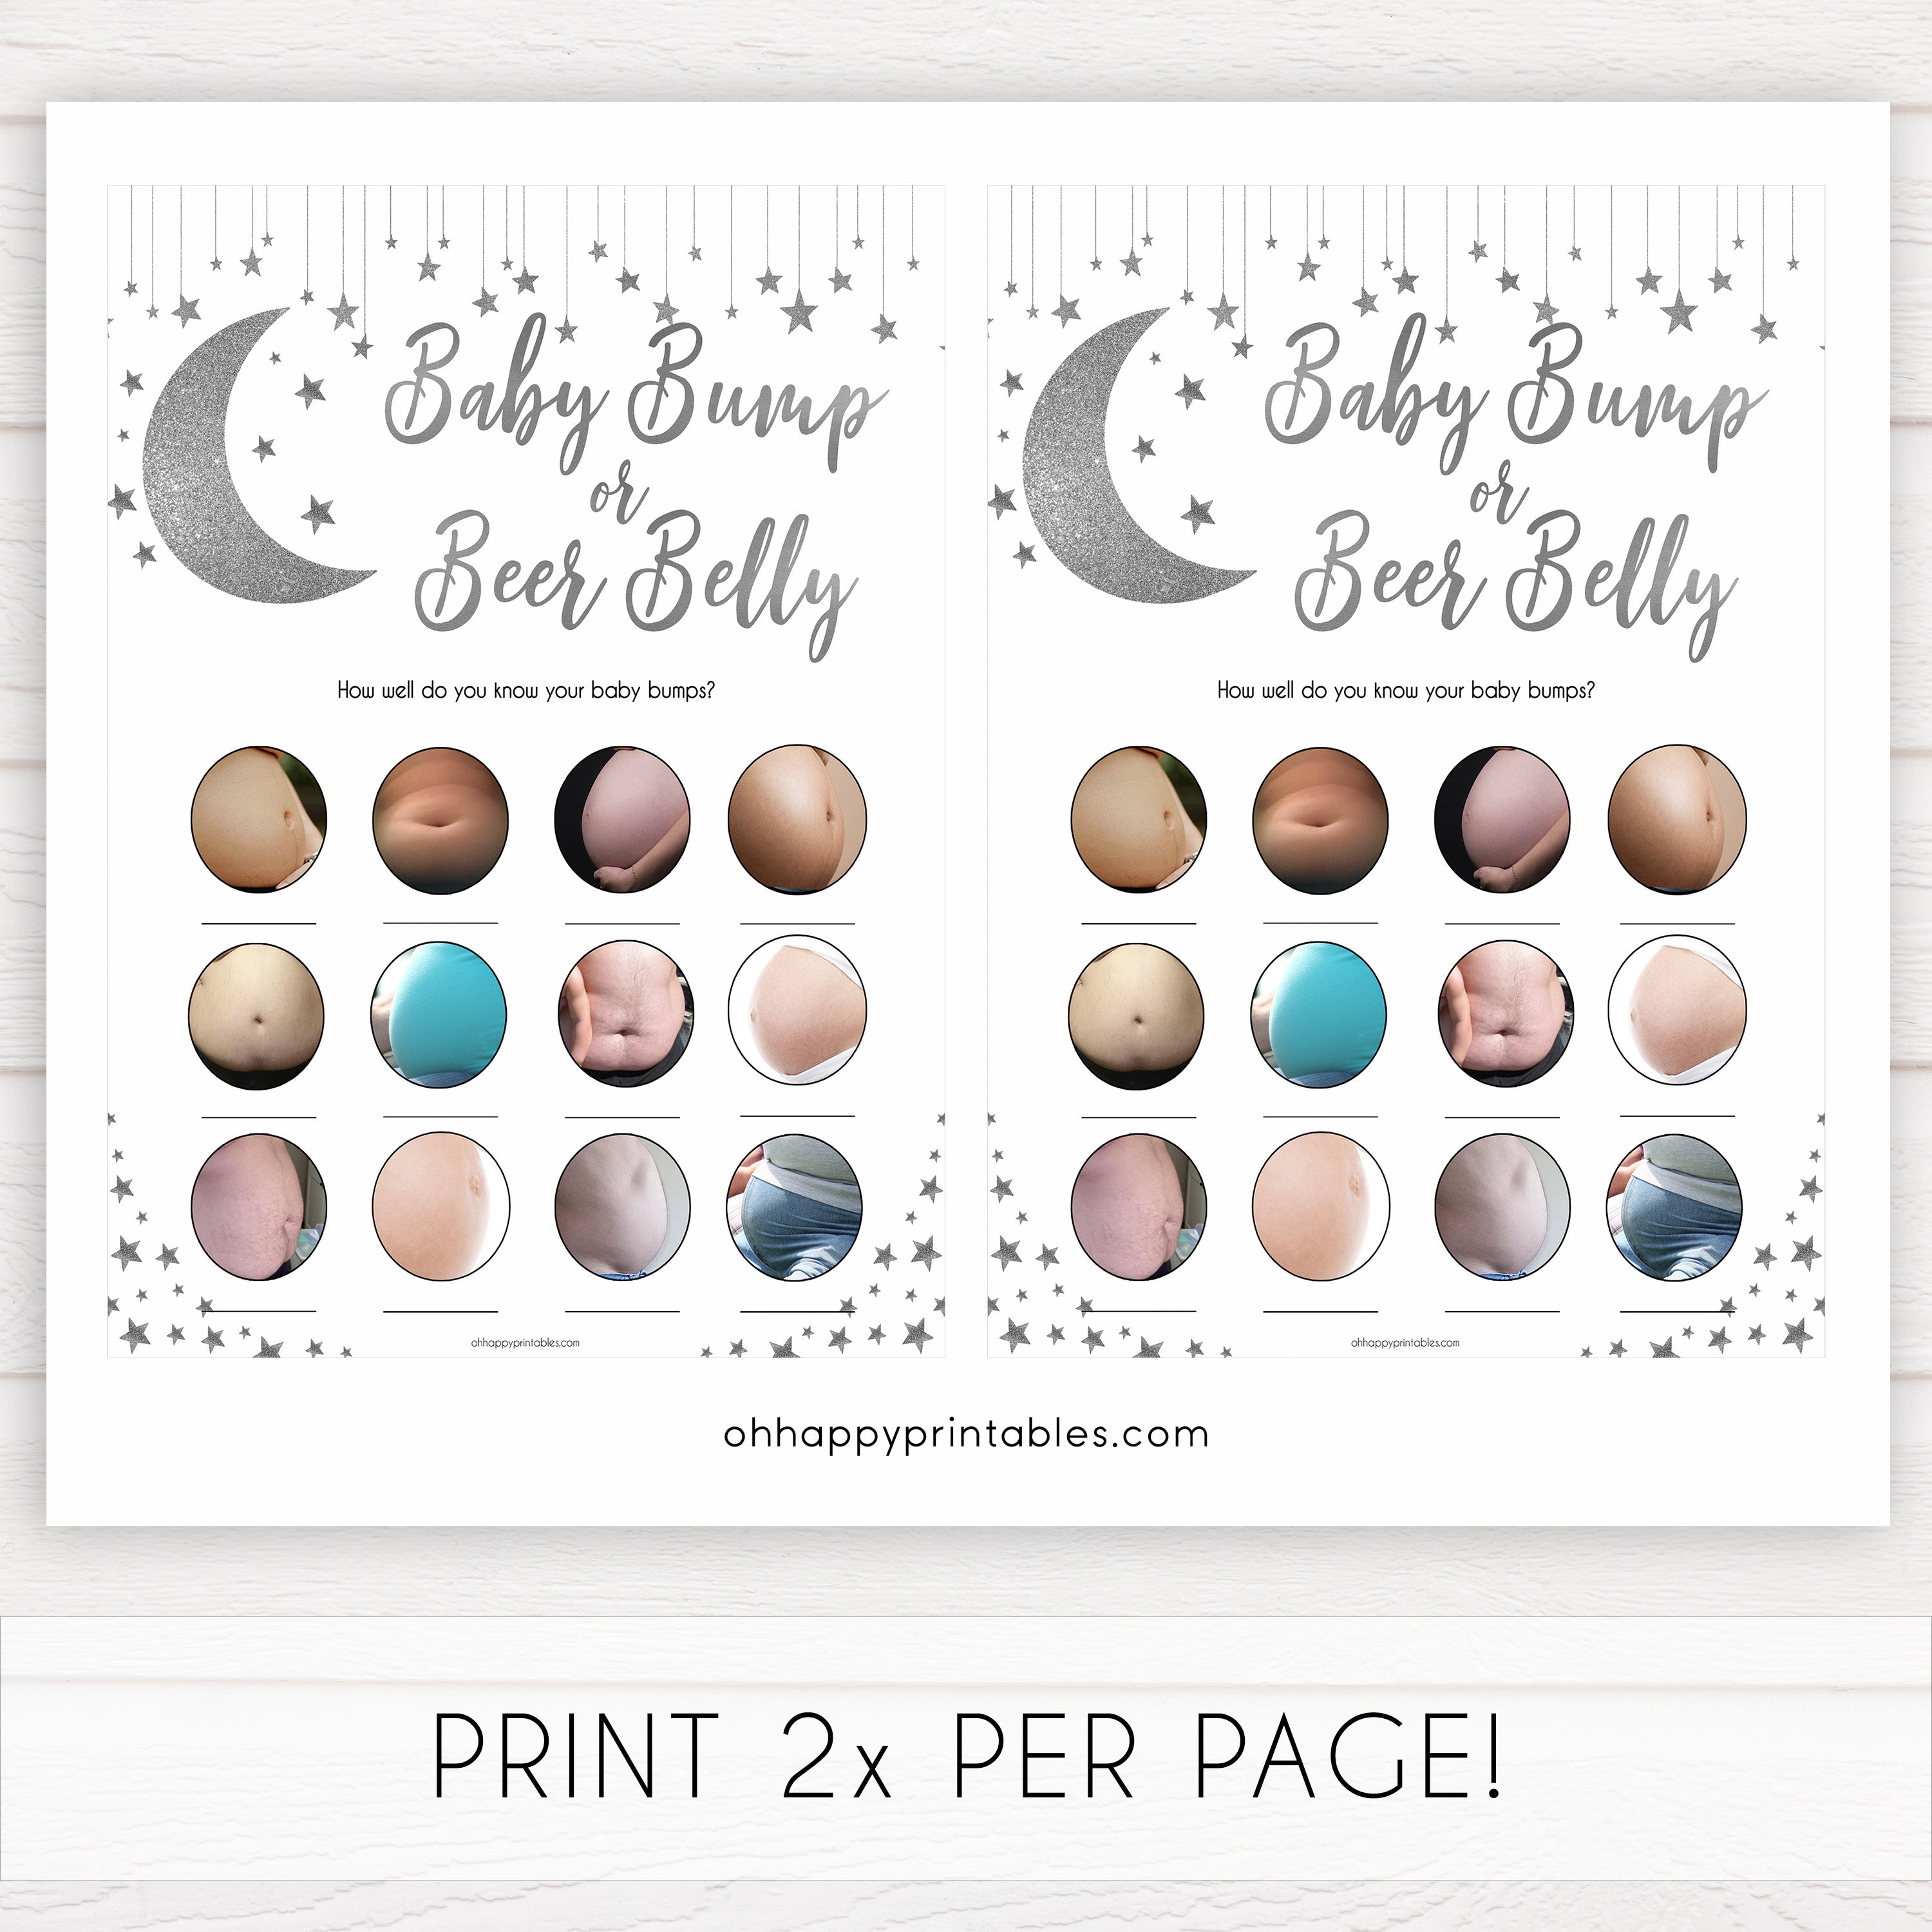 Silver little star, baby bump or beer belly, baby bump game, baby games, baby shower games, printable baby games, fun baby games, twinkle little star games, baby games, fun baby shower ideas, baby shower ideas